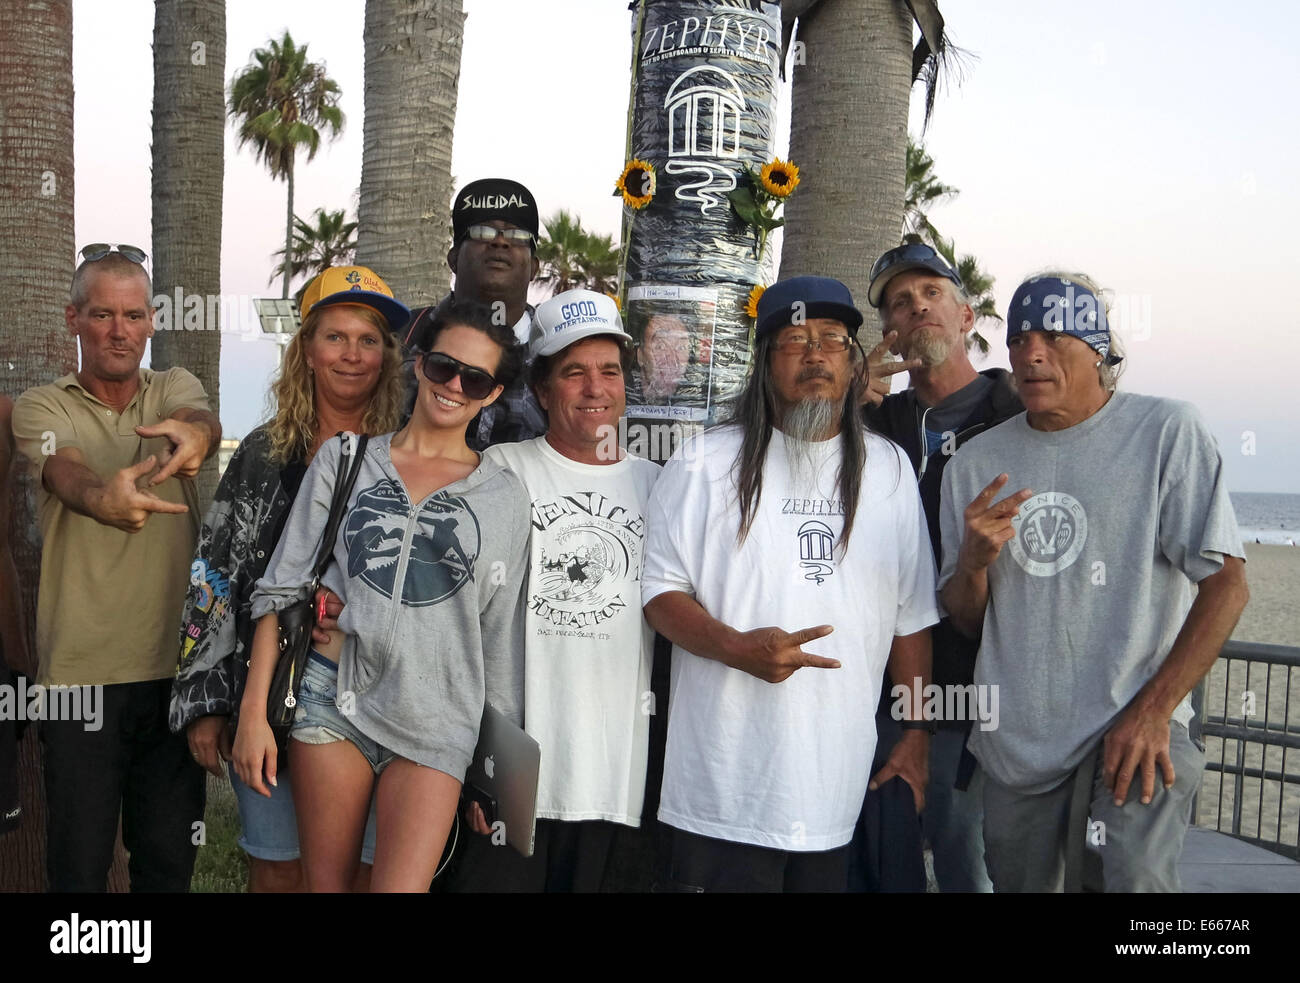 Venice, California, USA. 15th Aug, 2014. A group gathers at Venice Skate Park to pay tribute to original Dogtown Z-Boys skateboarder Jay Adams who passed away on Thursday in Mexico. Jeff Ho, third from right, was a catalyst to help form the Z-boys team at his store Jeff Ho Surfboards and Zephyr Productions in the early 1970's. © Jonathan Alcorn/ZUMA Wire/Alamy Live News Stock Photo